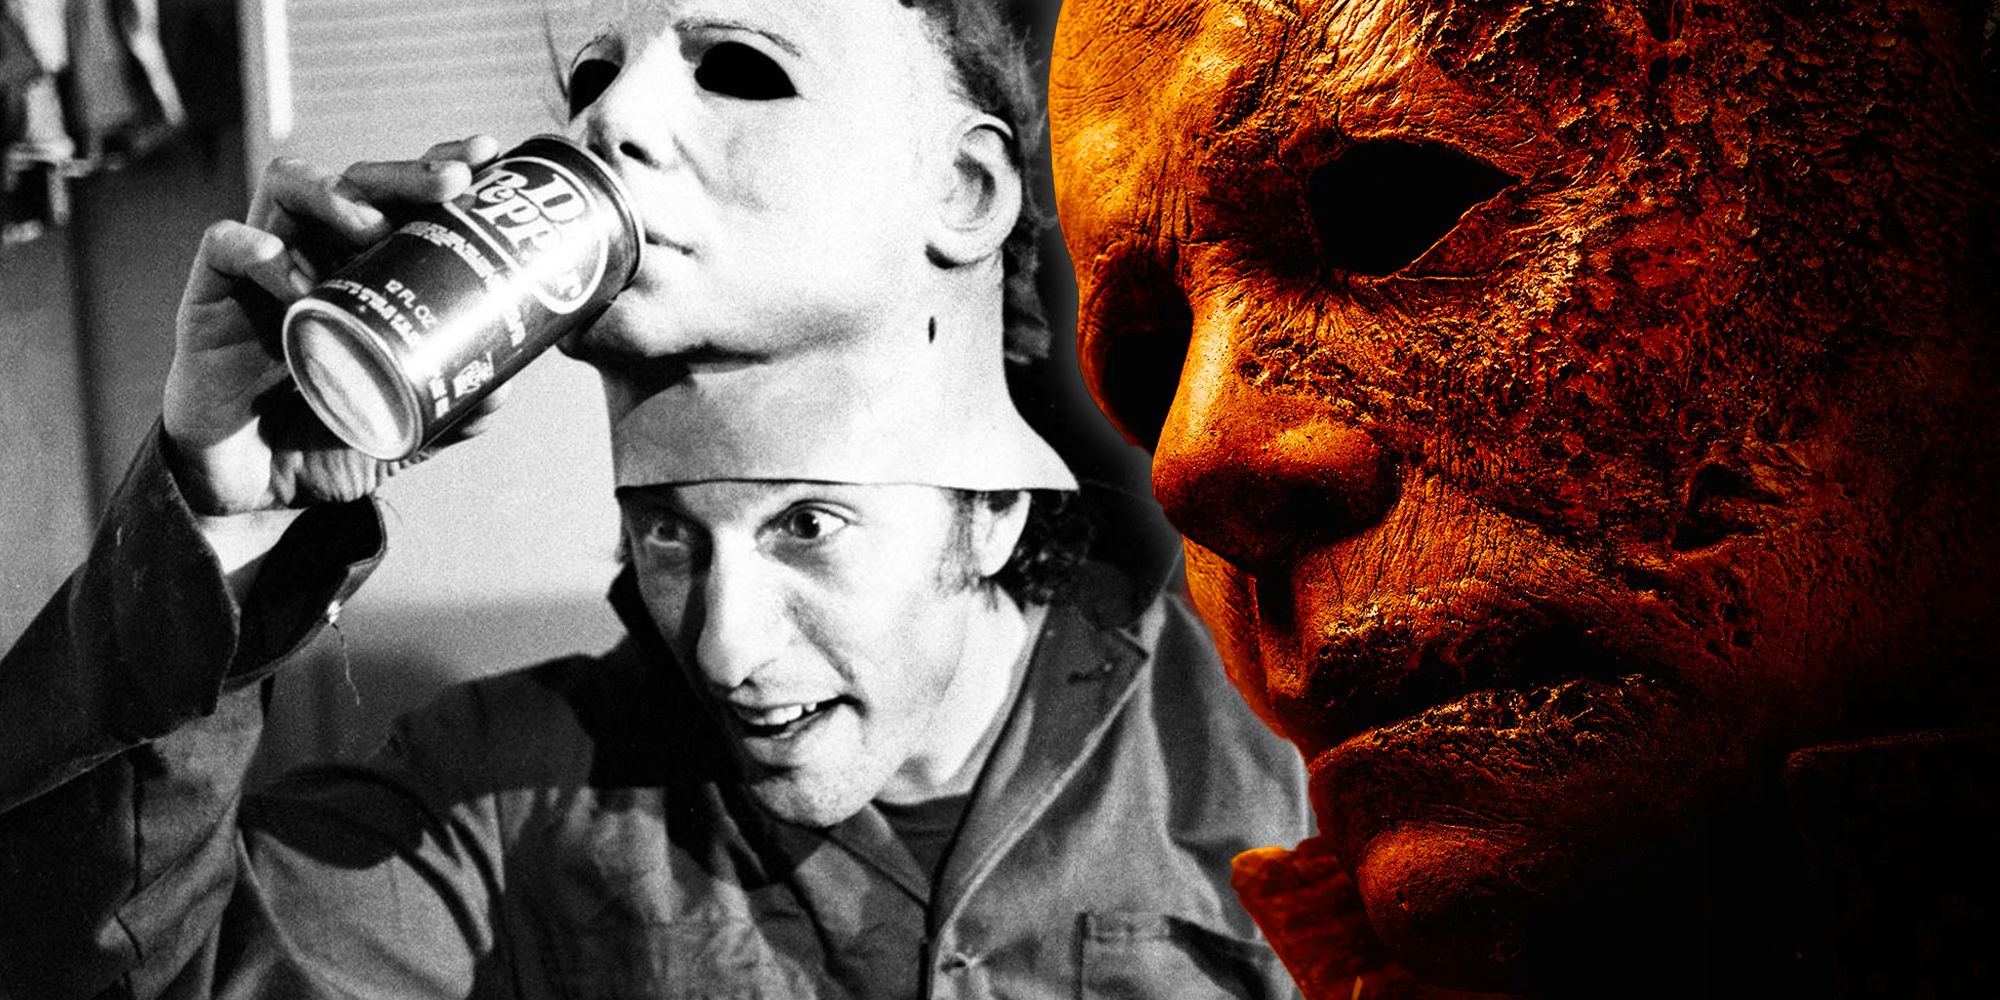 Halloween Original & New Michael Myers Actors Are Good Friends in Real Life